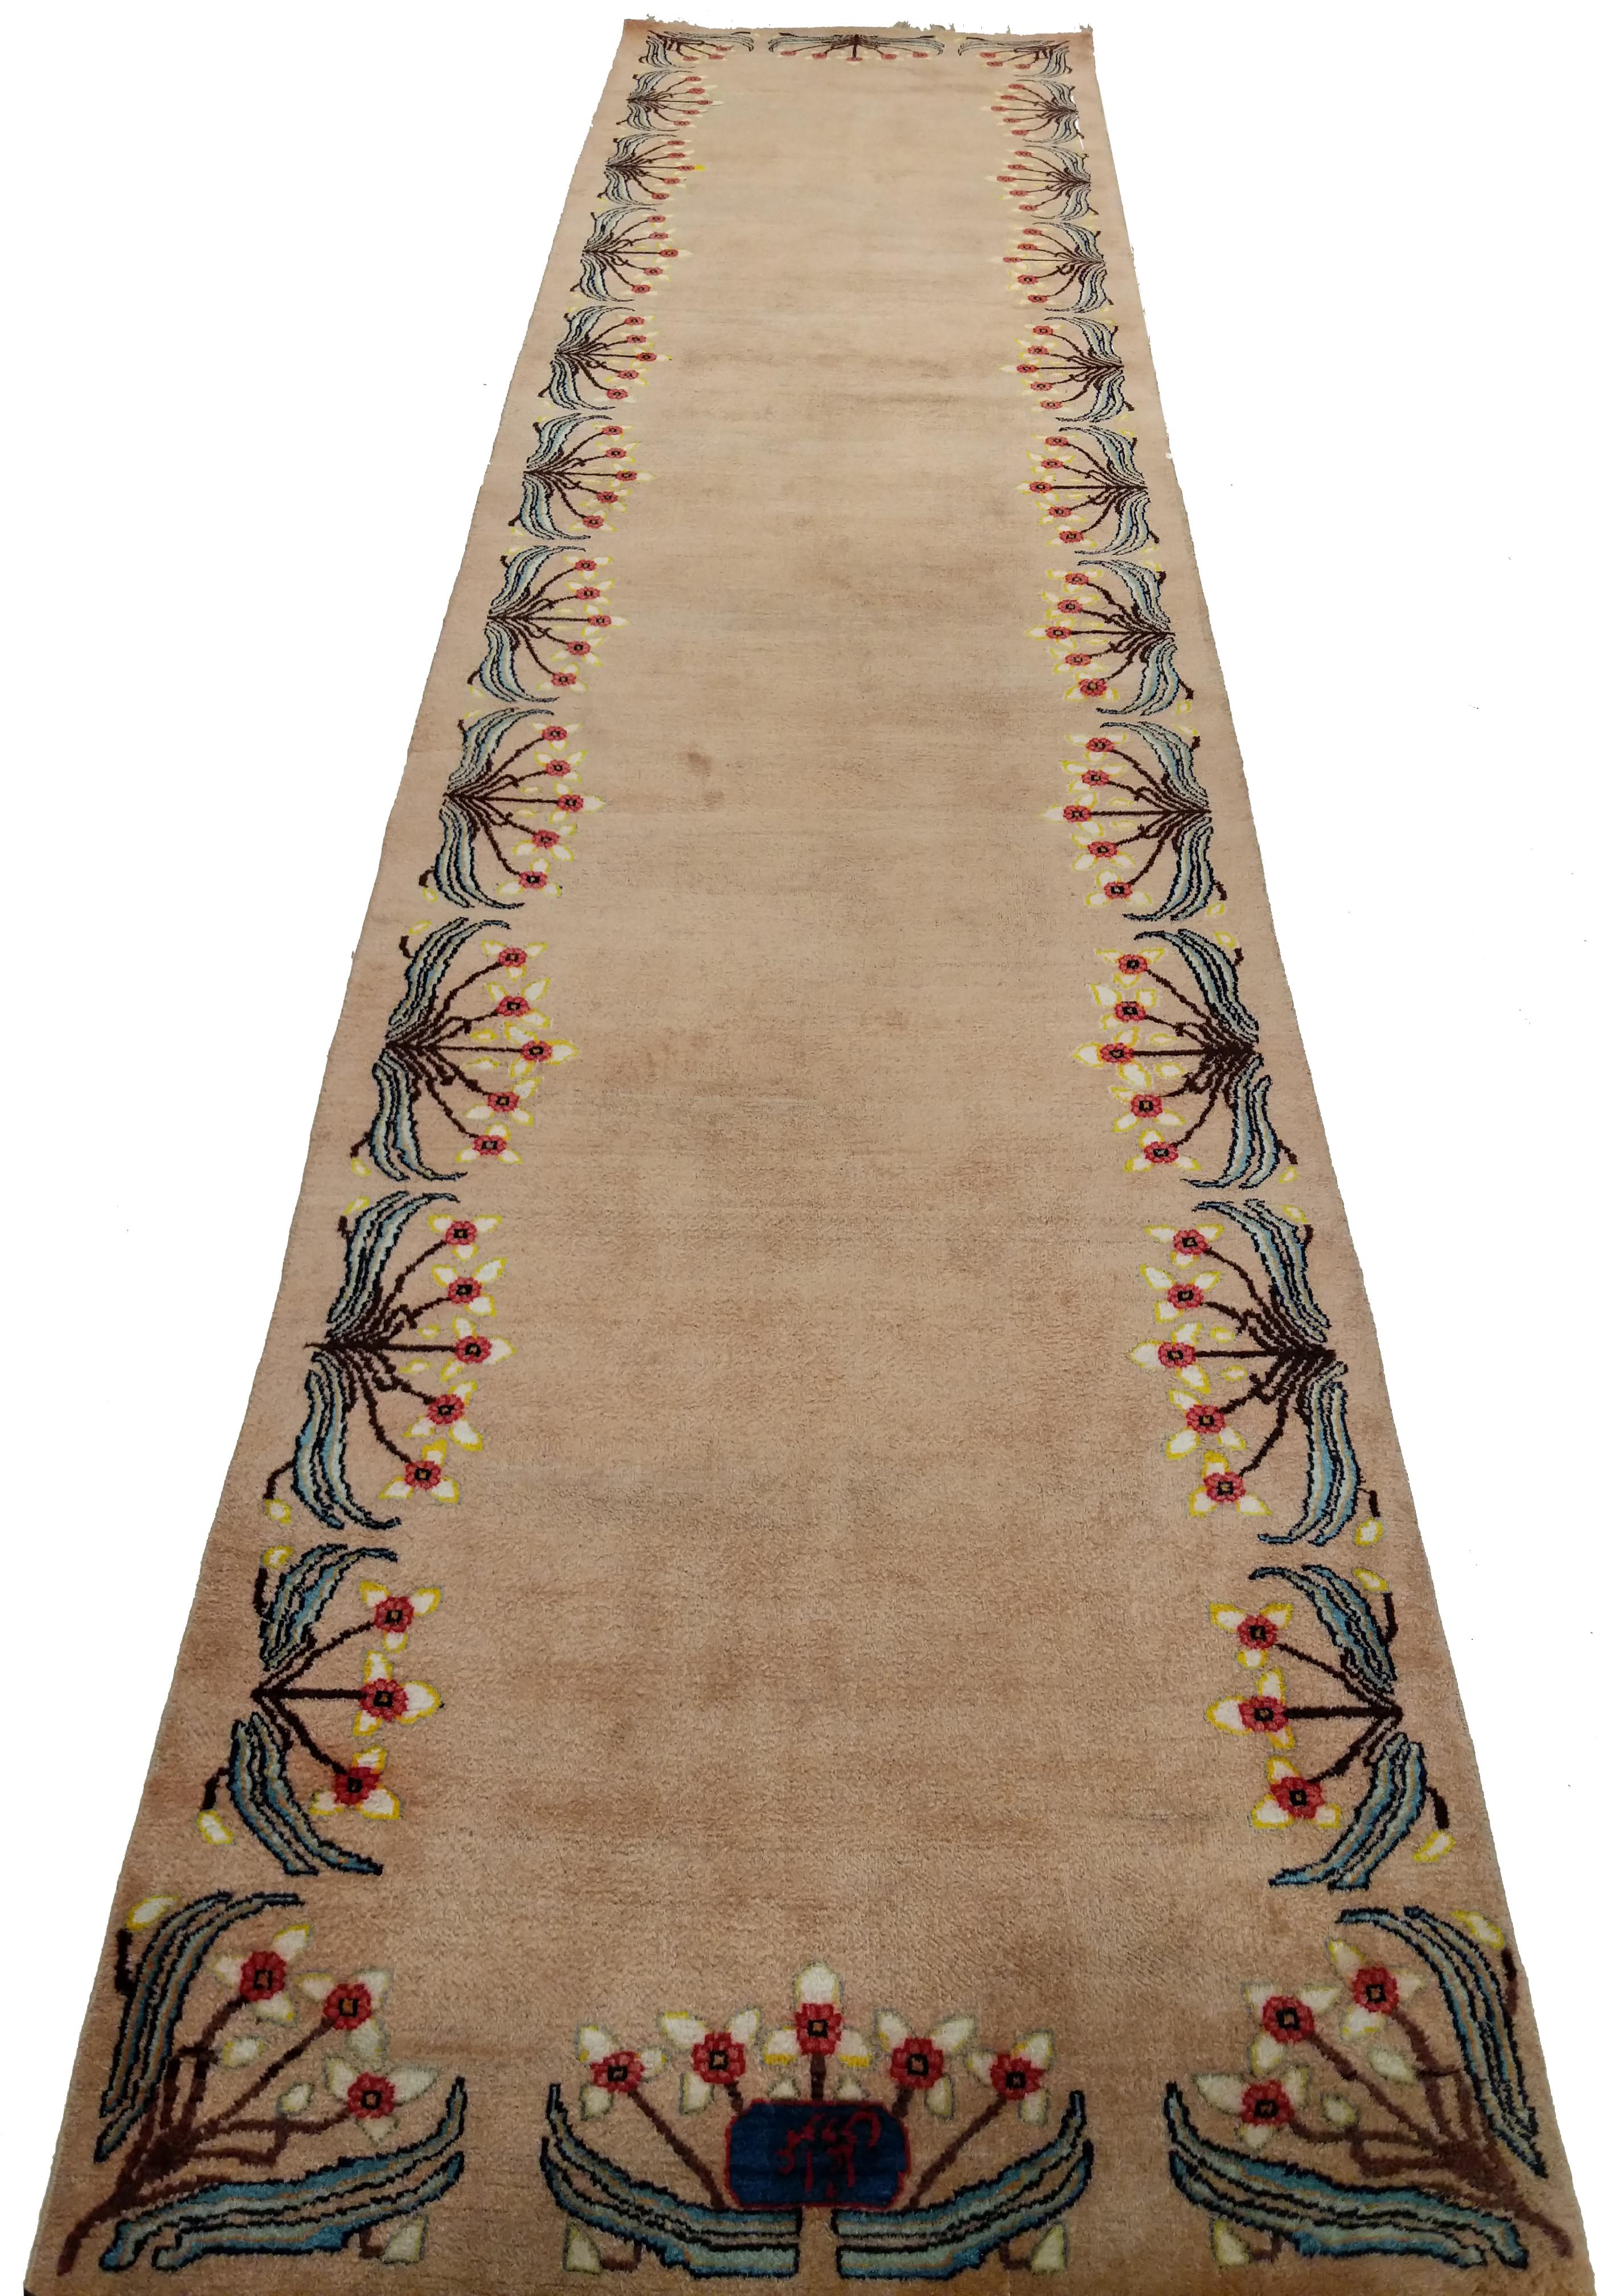 A stunning modernist oriental rug distinguished by a beige open field framed by a floral blossom motif characteristic of Arts & Crafts and Art Nouveau rugs of Europe. Rugs of this type were sometimes commissioned by the architects responsible for